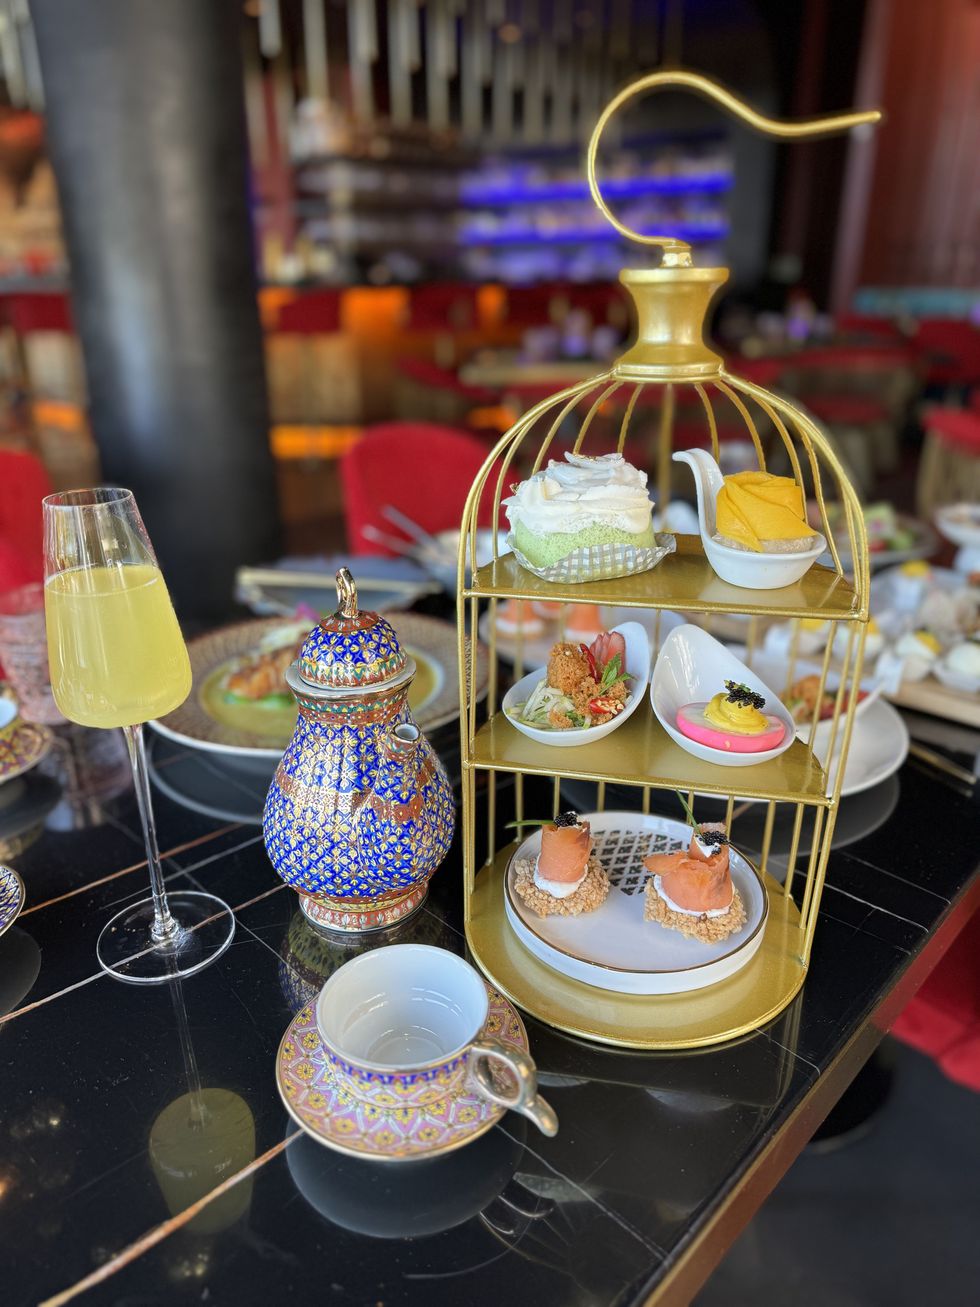 A high tea spread that includes a Thai tea kettle and cup, and a tiered circular tray with sandwiches and sweets.